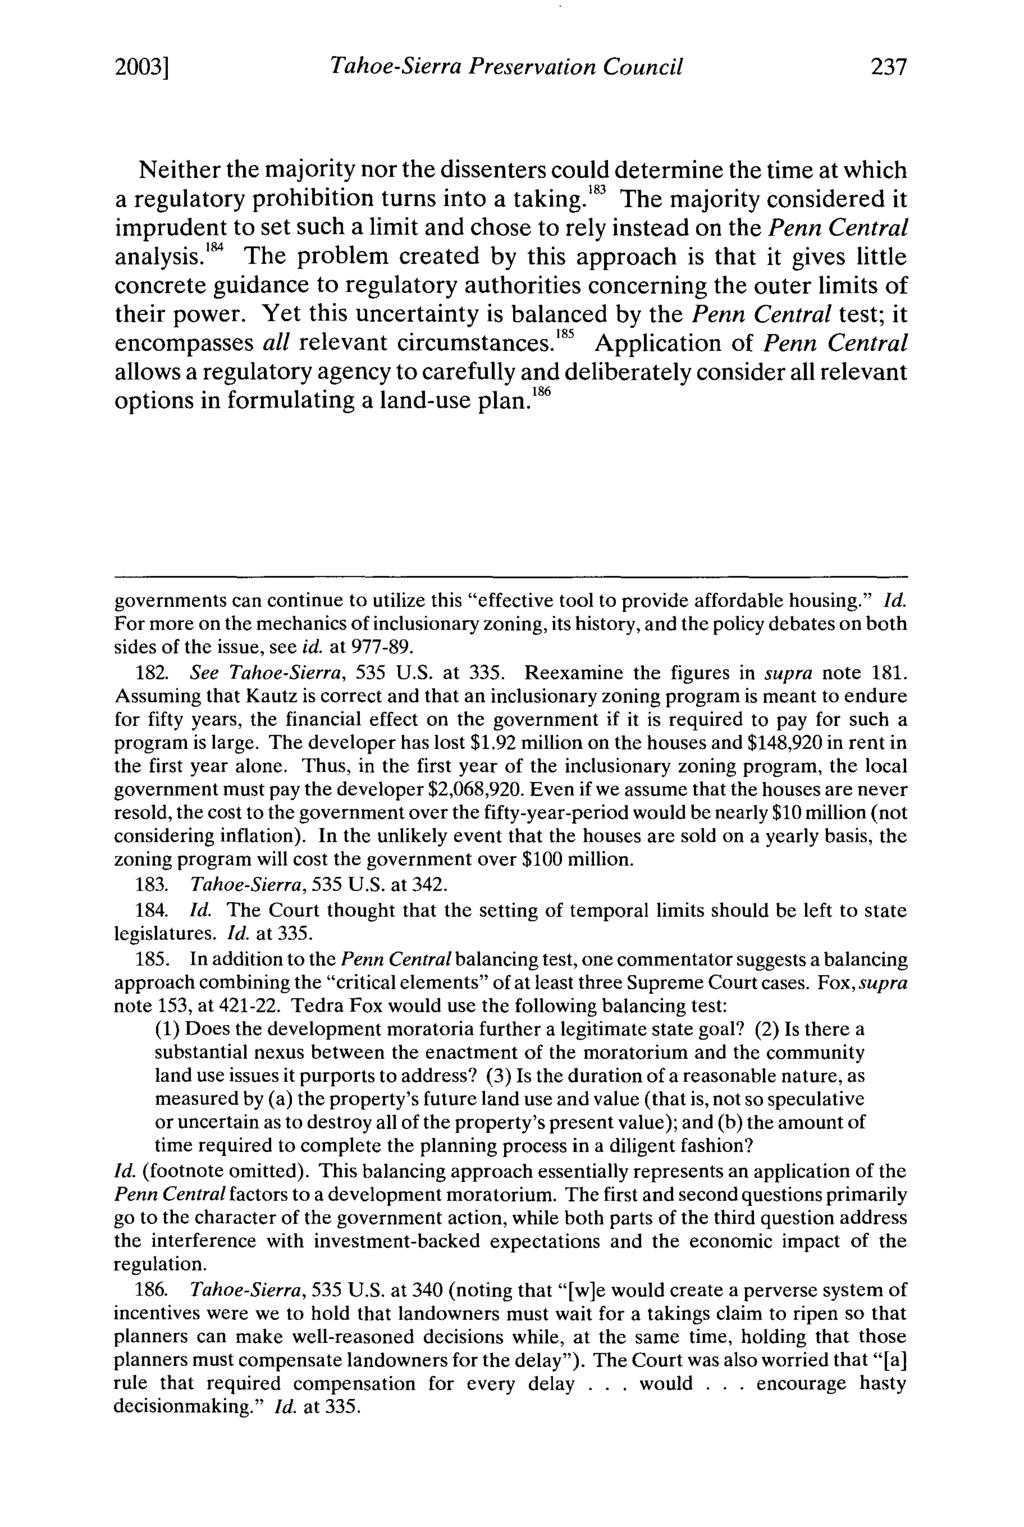 2003] Tahoe-Sierra Preservation Council Neither the majority nor the dissenters could determine the time at which a regulatory prohibition turns into a taking.